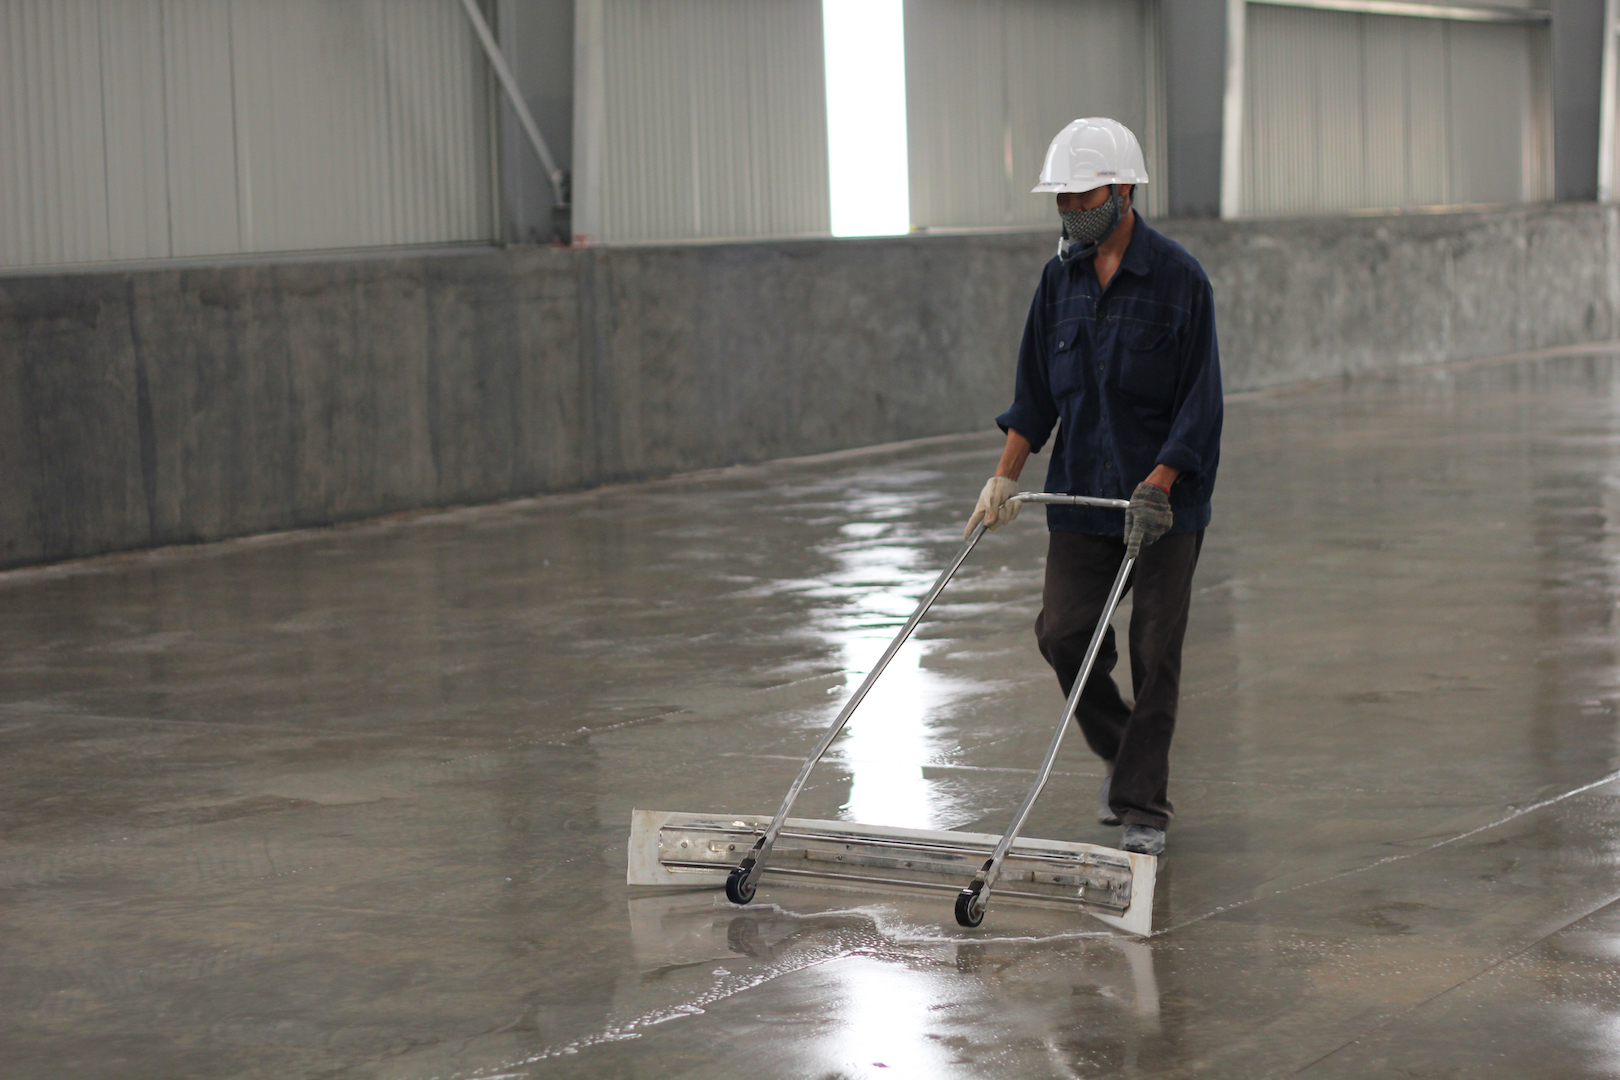 Sooner the better: PENESEAL FH sealer was applied immediately after the concrete finishing and as soon as the surface was firm enough to walk on – before hairline or temperature cracking could begin.